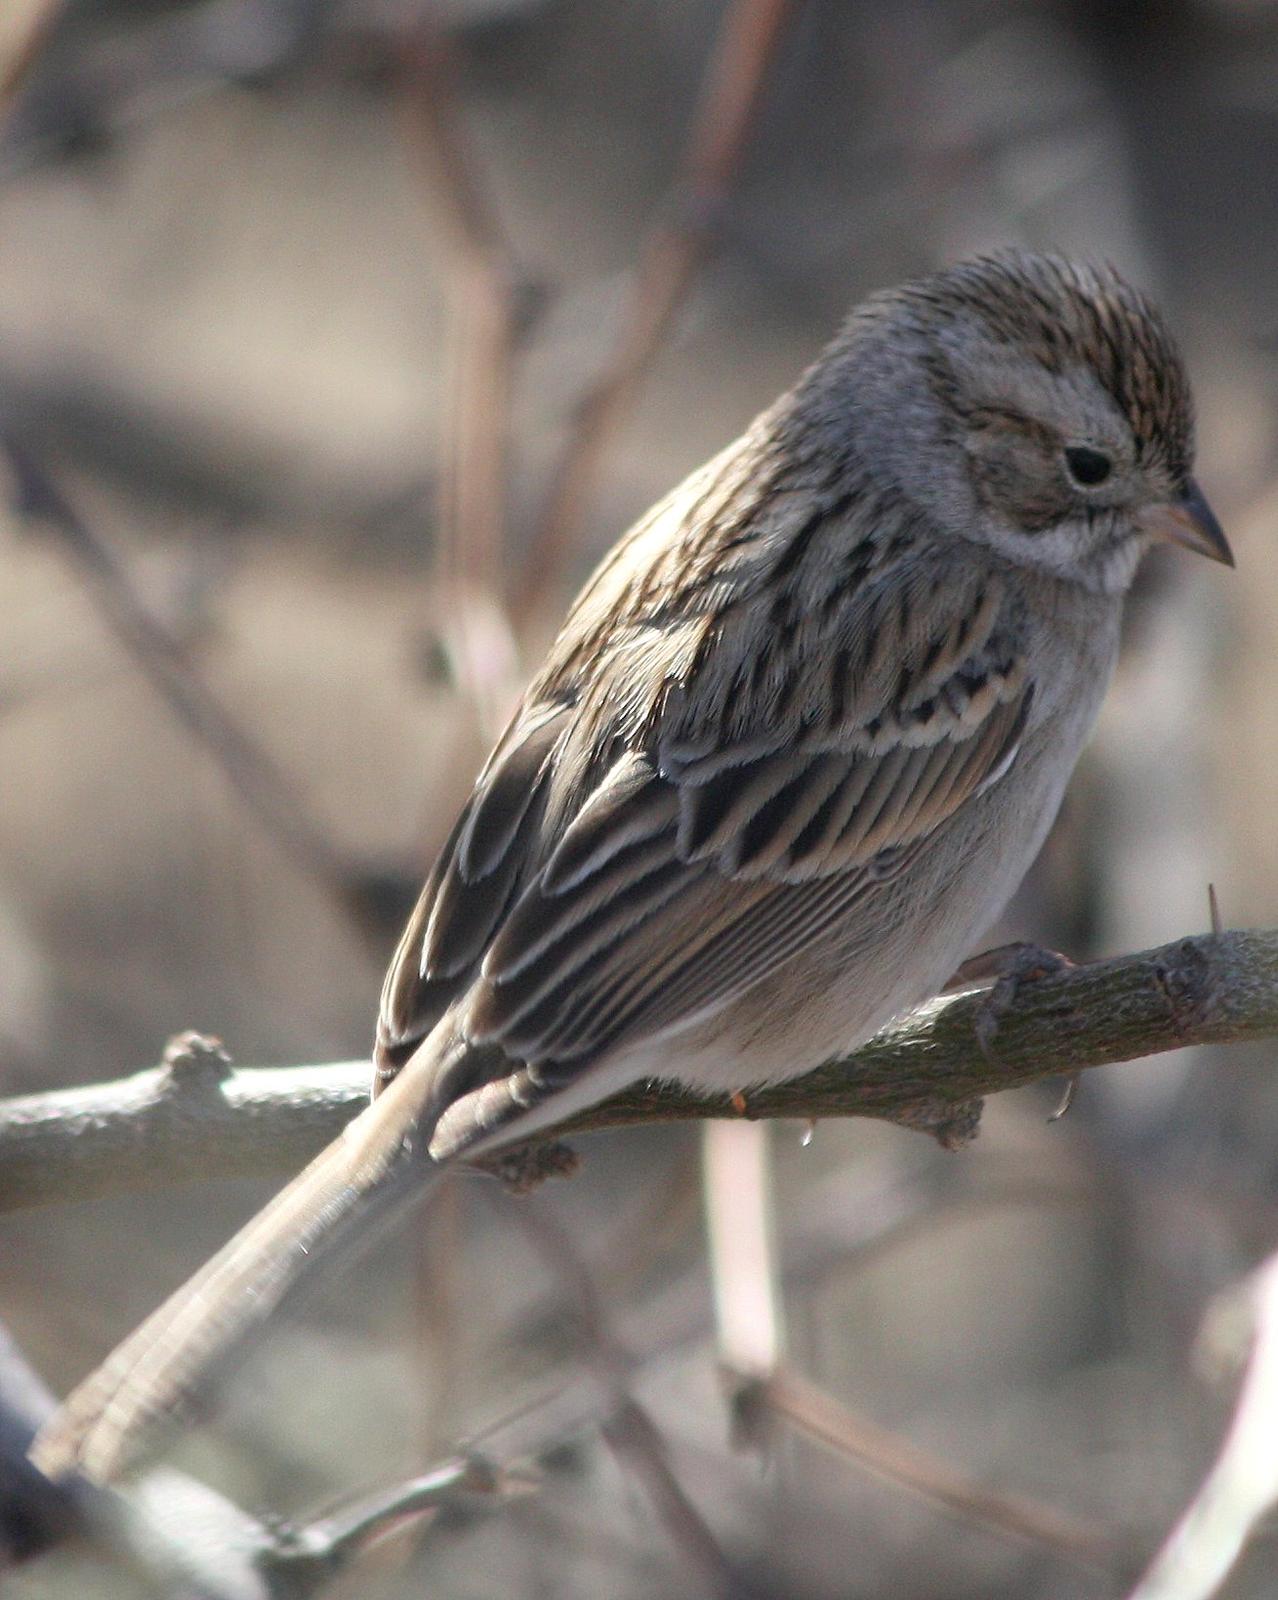 Brewer's Sparrow Photo by Andrew Core